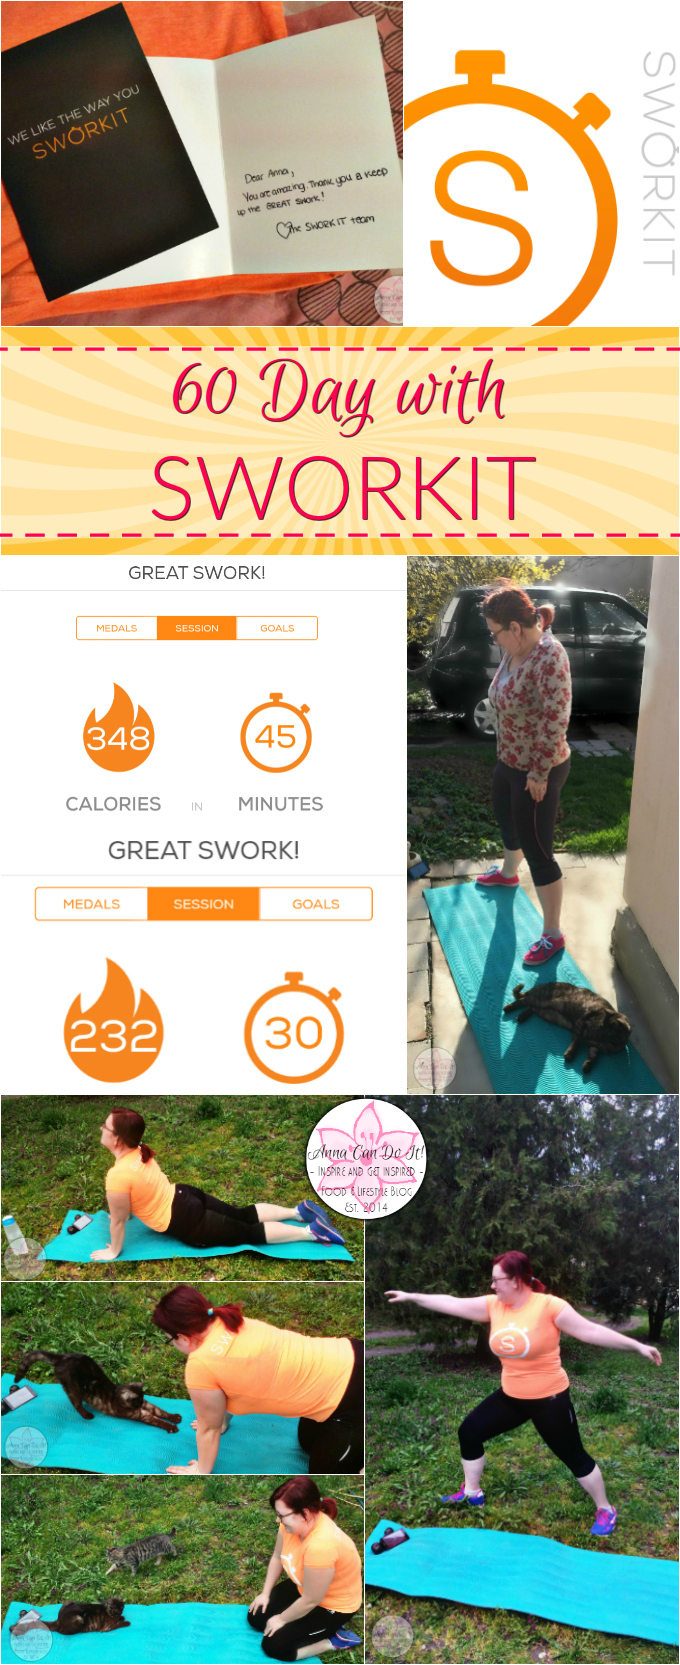 60 Day with Sworkit - Anna Can Do It!